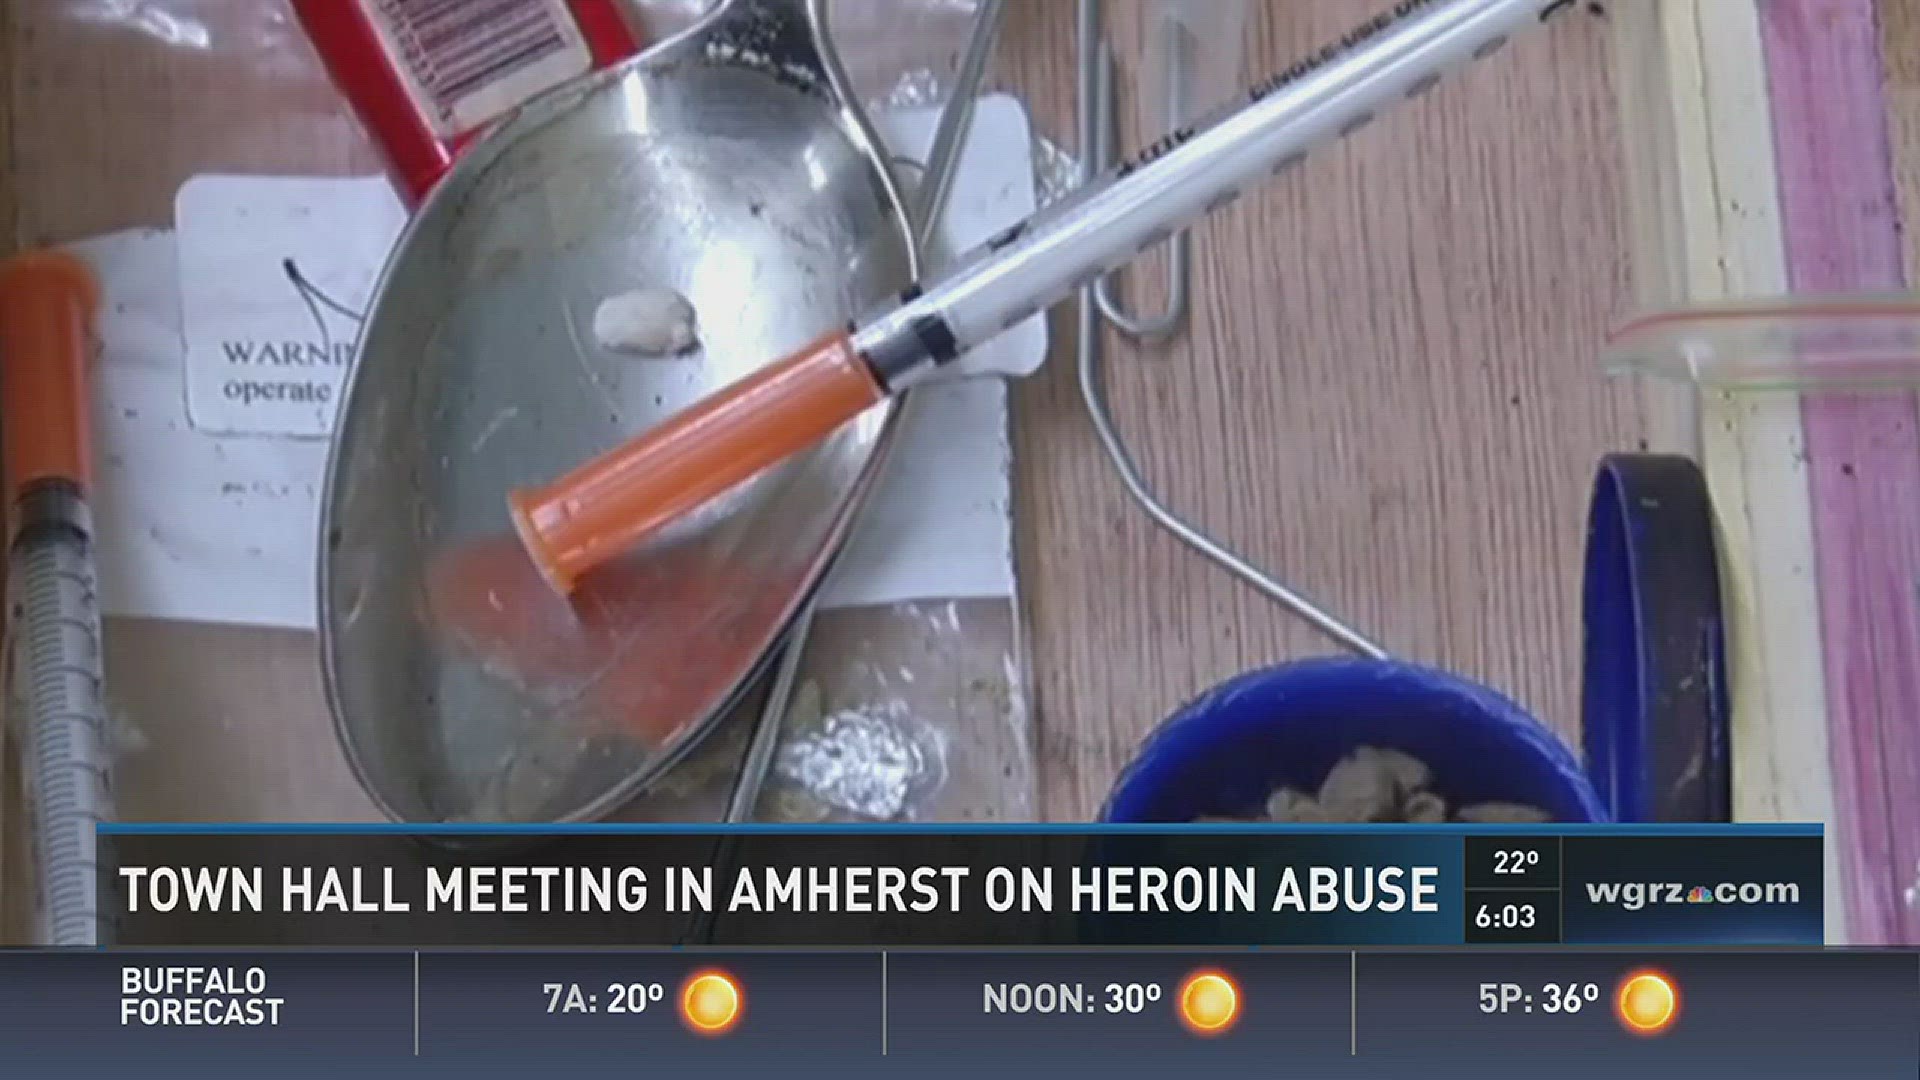 Amherst Town Hall meeting tonight on heroin abuse